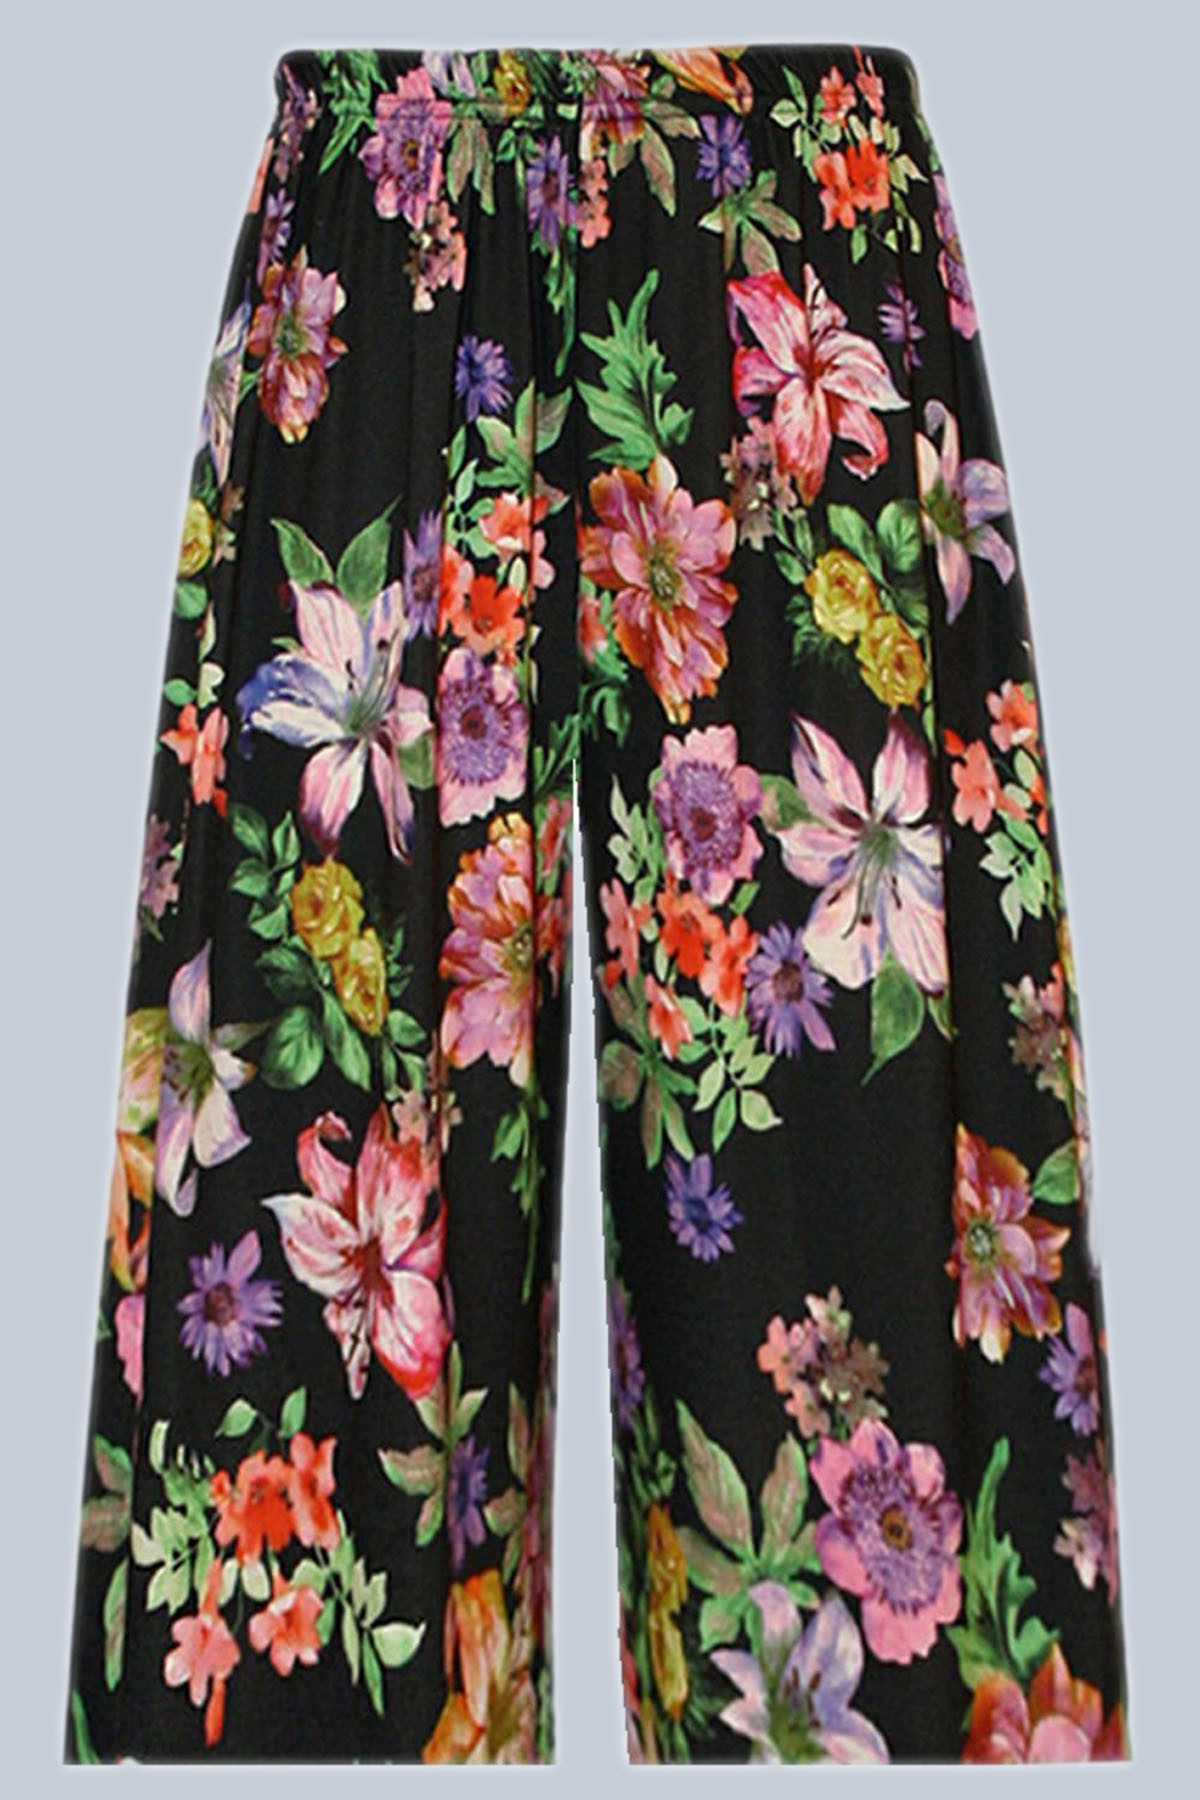 Womens Printed Stretchy Elasticated 3/4 Length Wide Leg Culottes Shorts 16-26